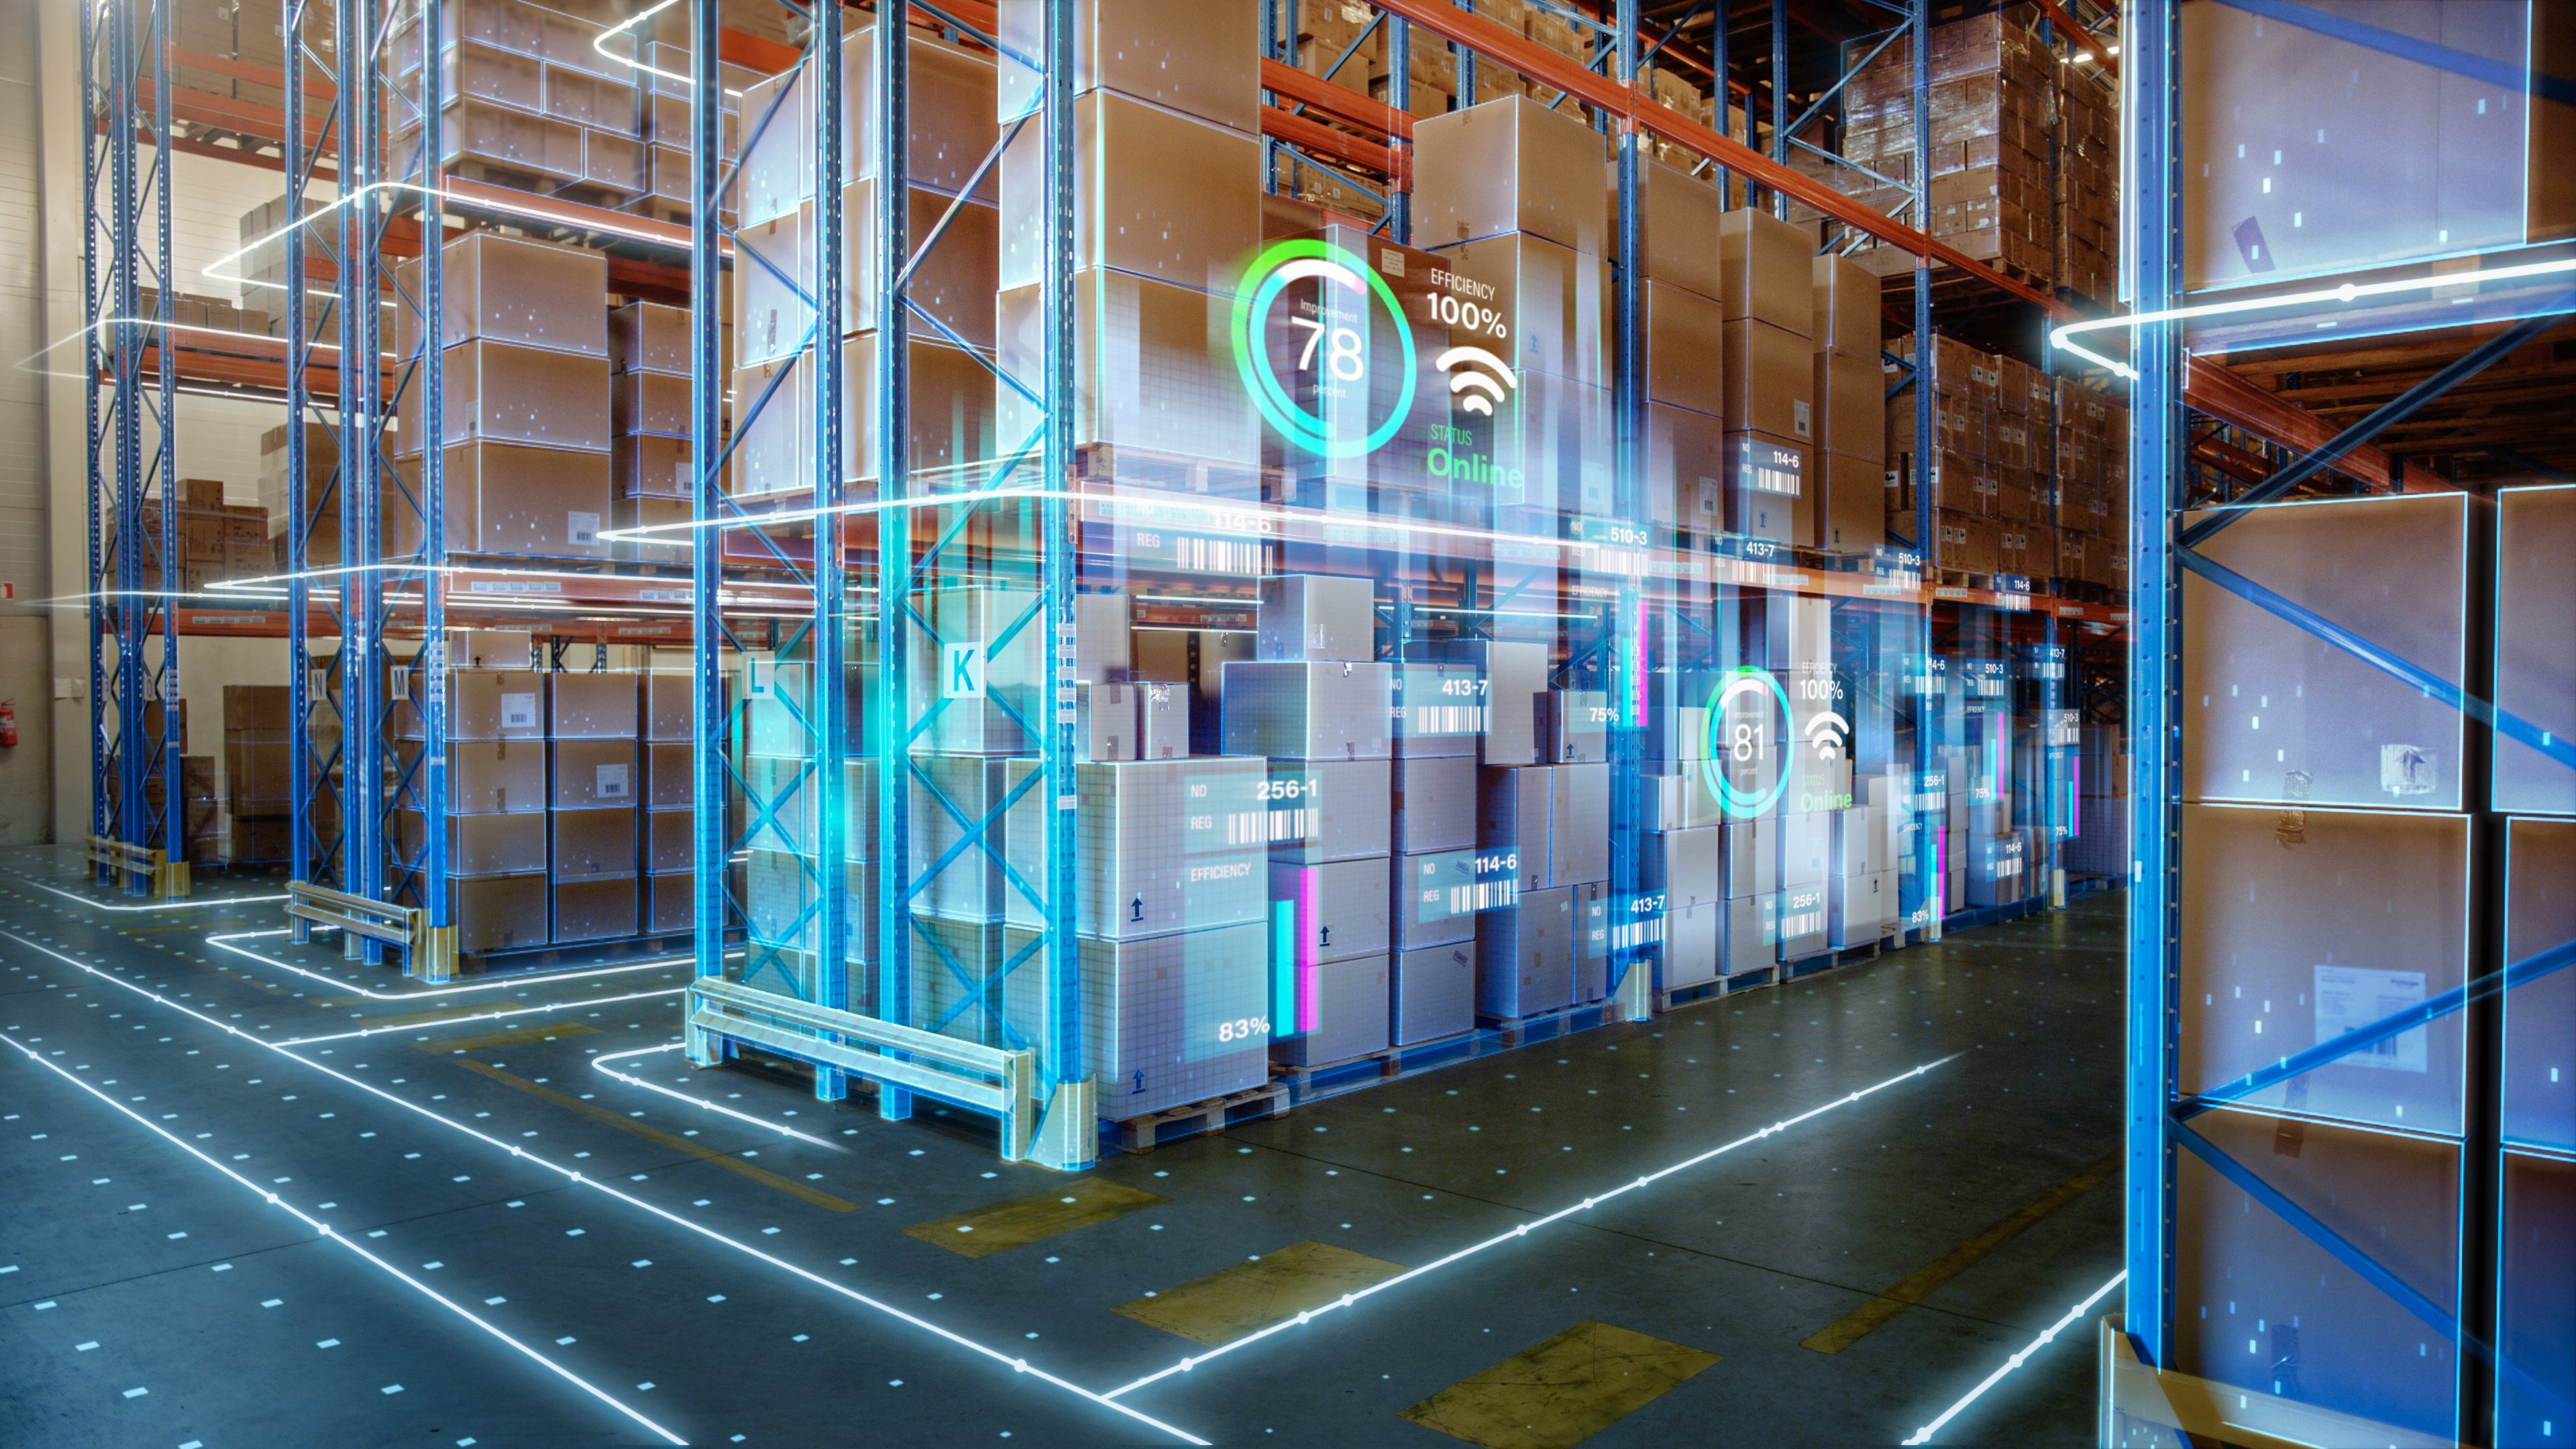 Futuristic technology warehouse controlled by a SaaS WMS - a Cloud-based WMS solution 